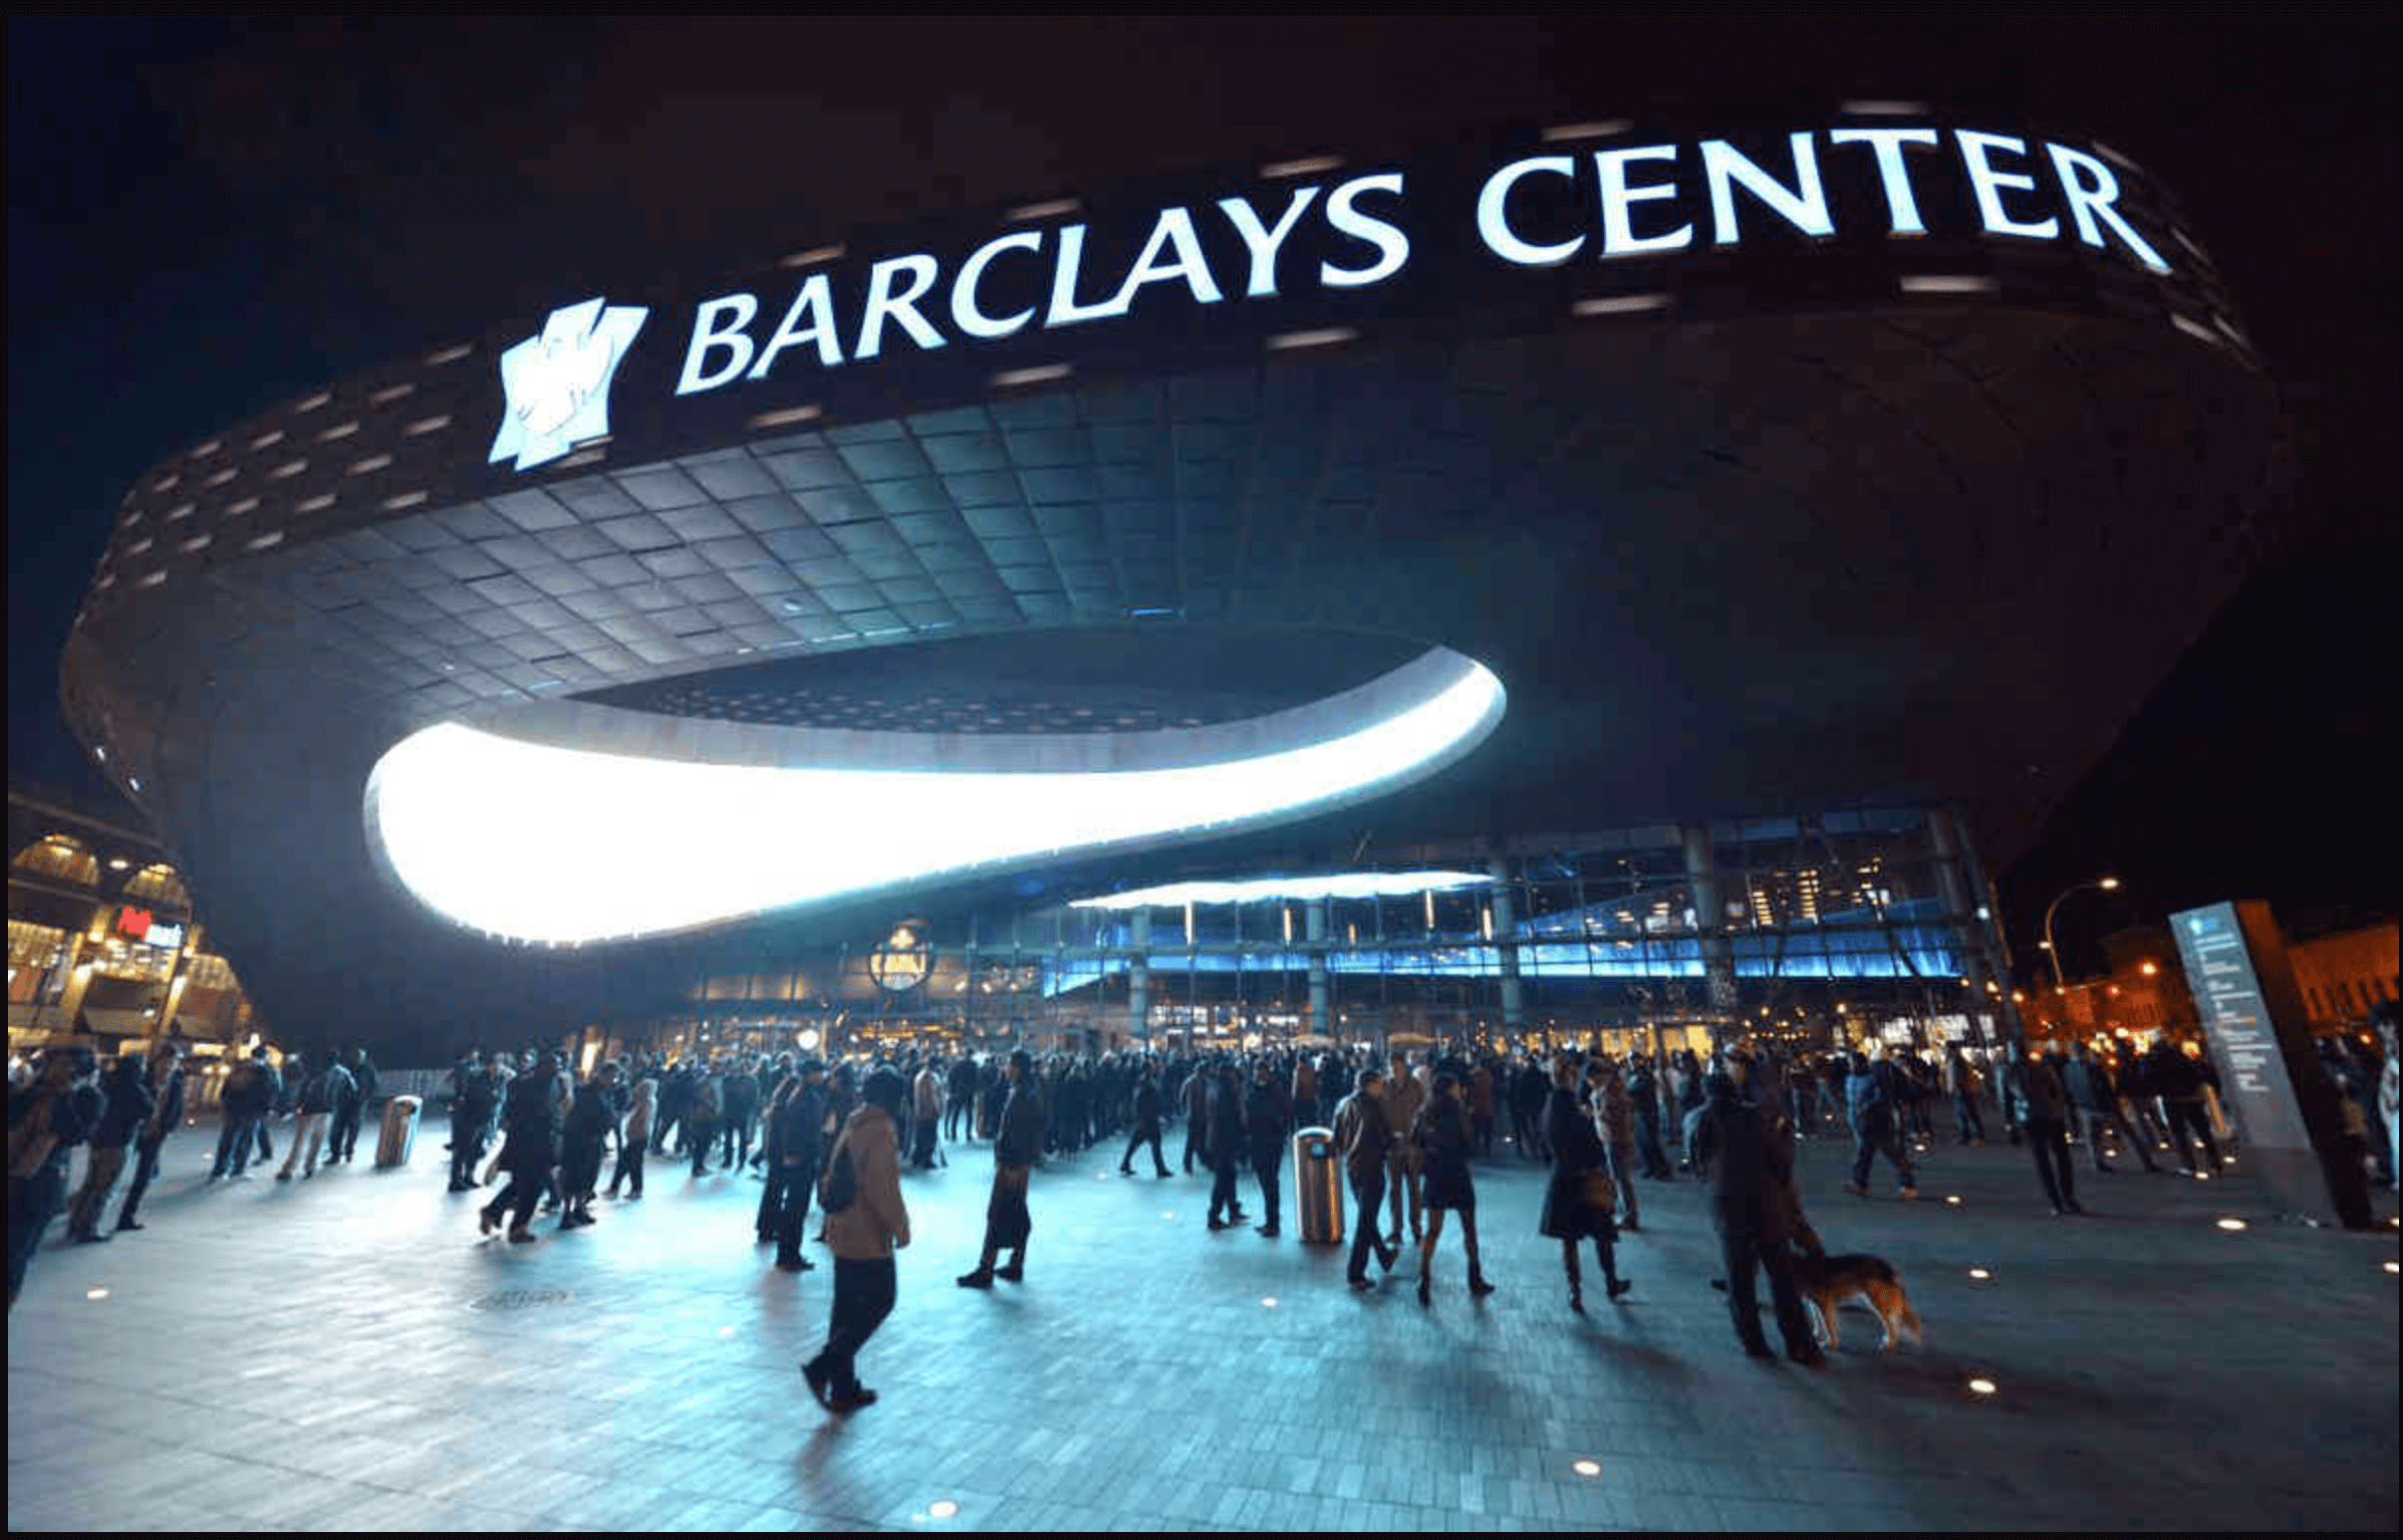 120 Barclays Center workers plan vote to stop paying dues to their